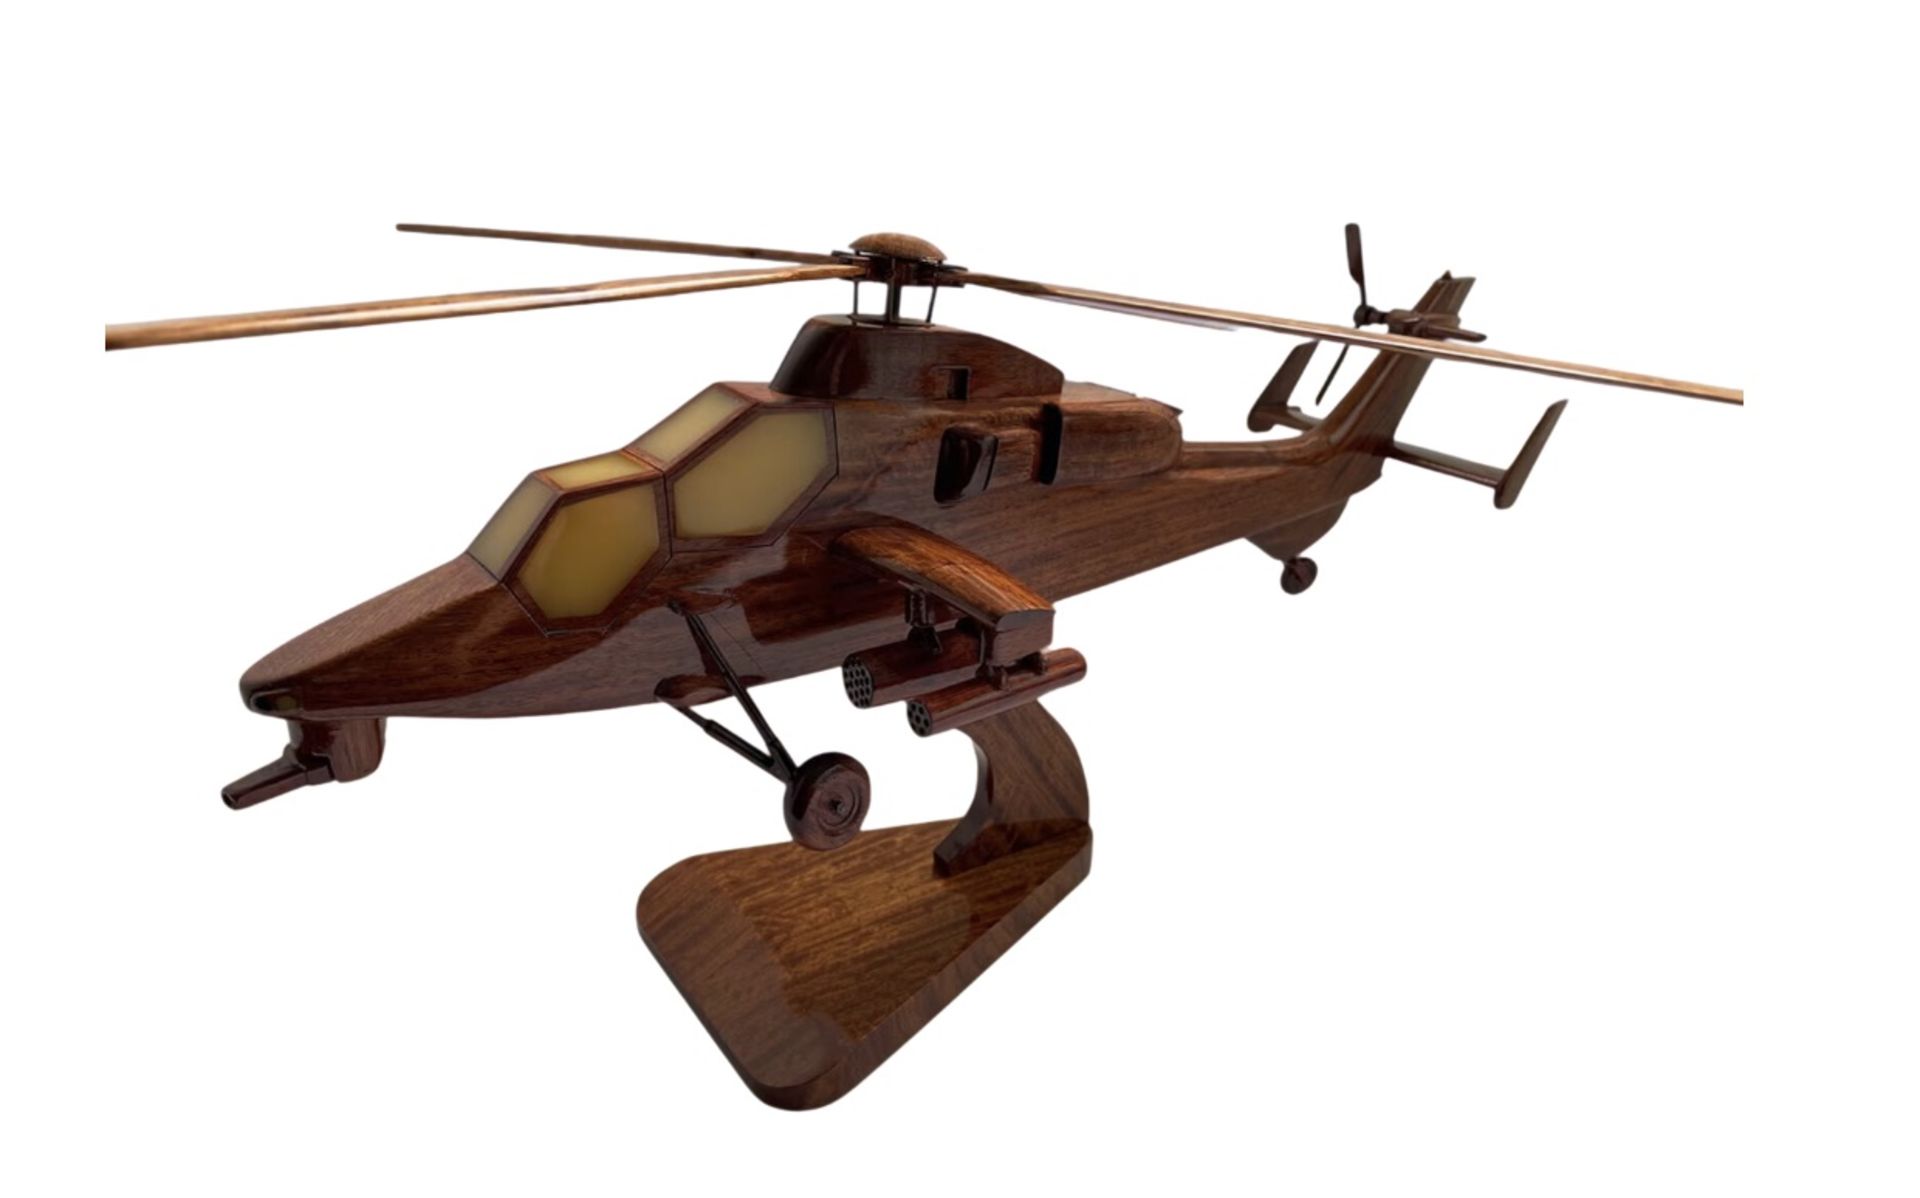 Eurocopter / Airbus Tiger Wooden Scale Desk Display Model